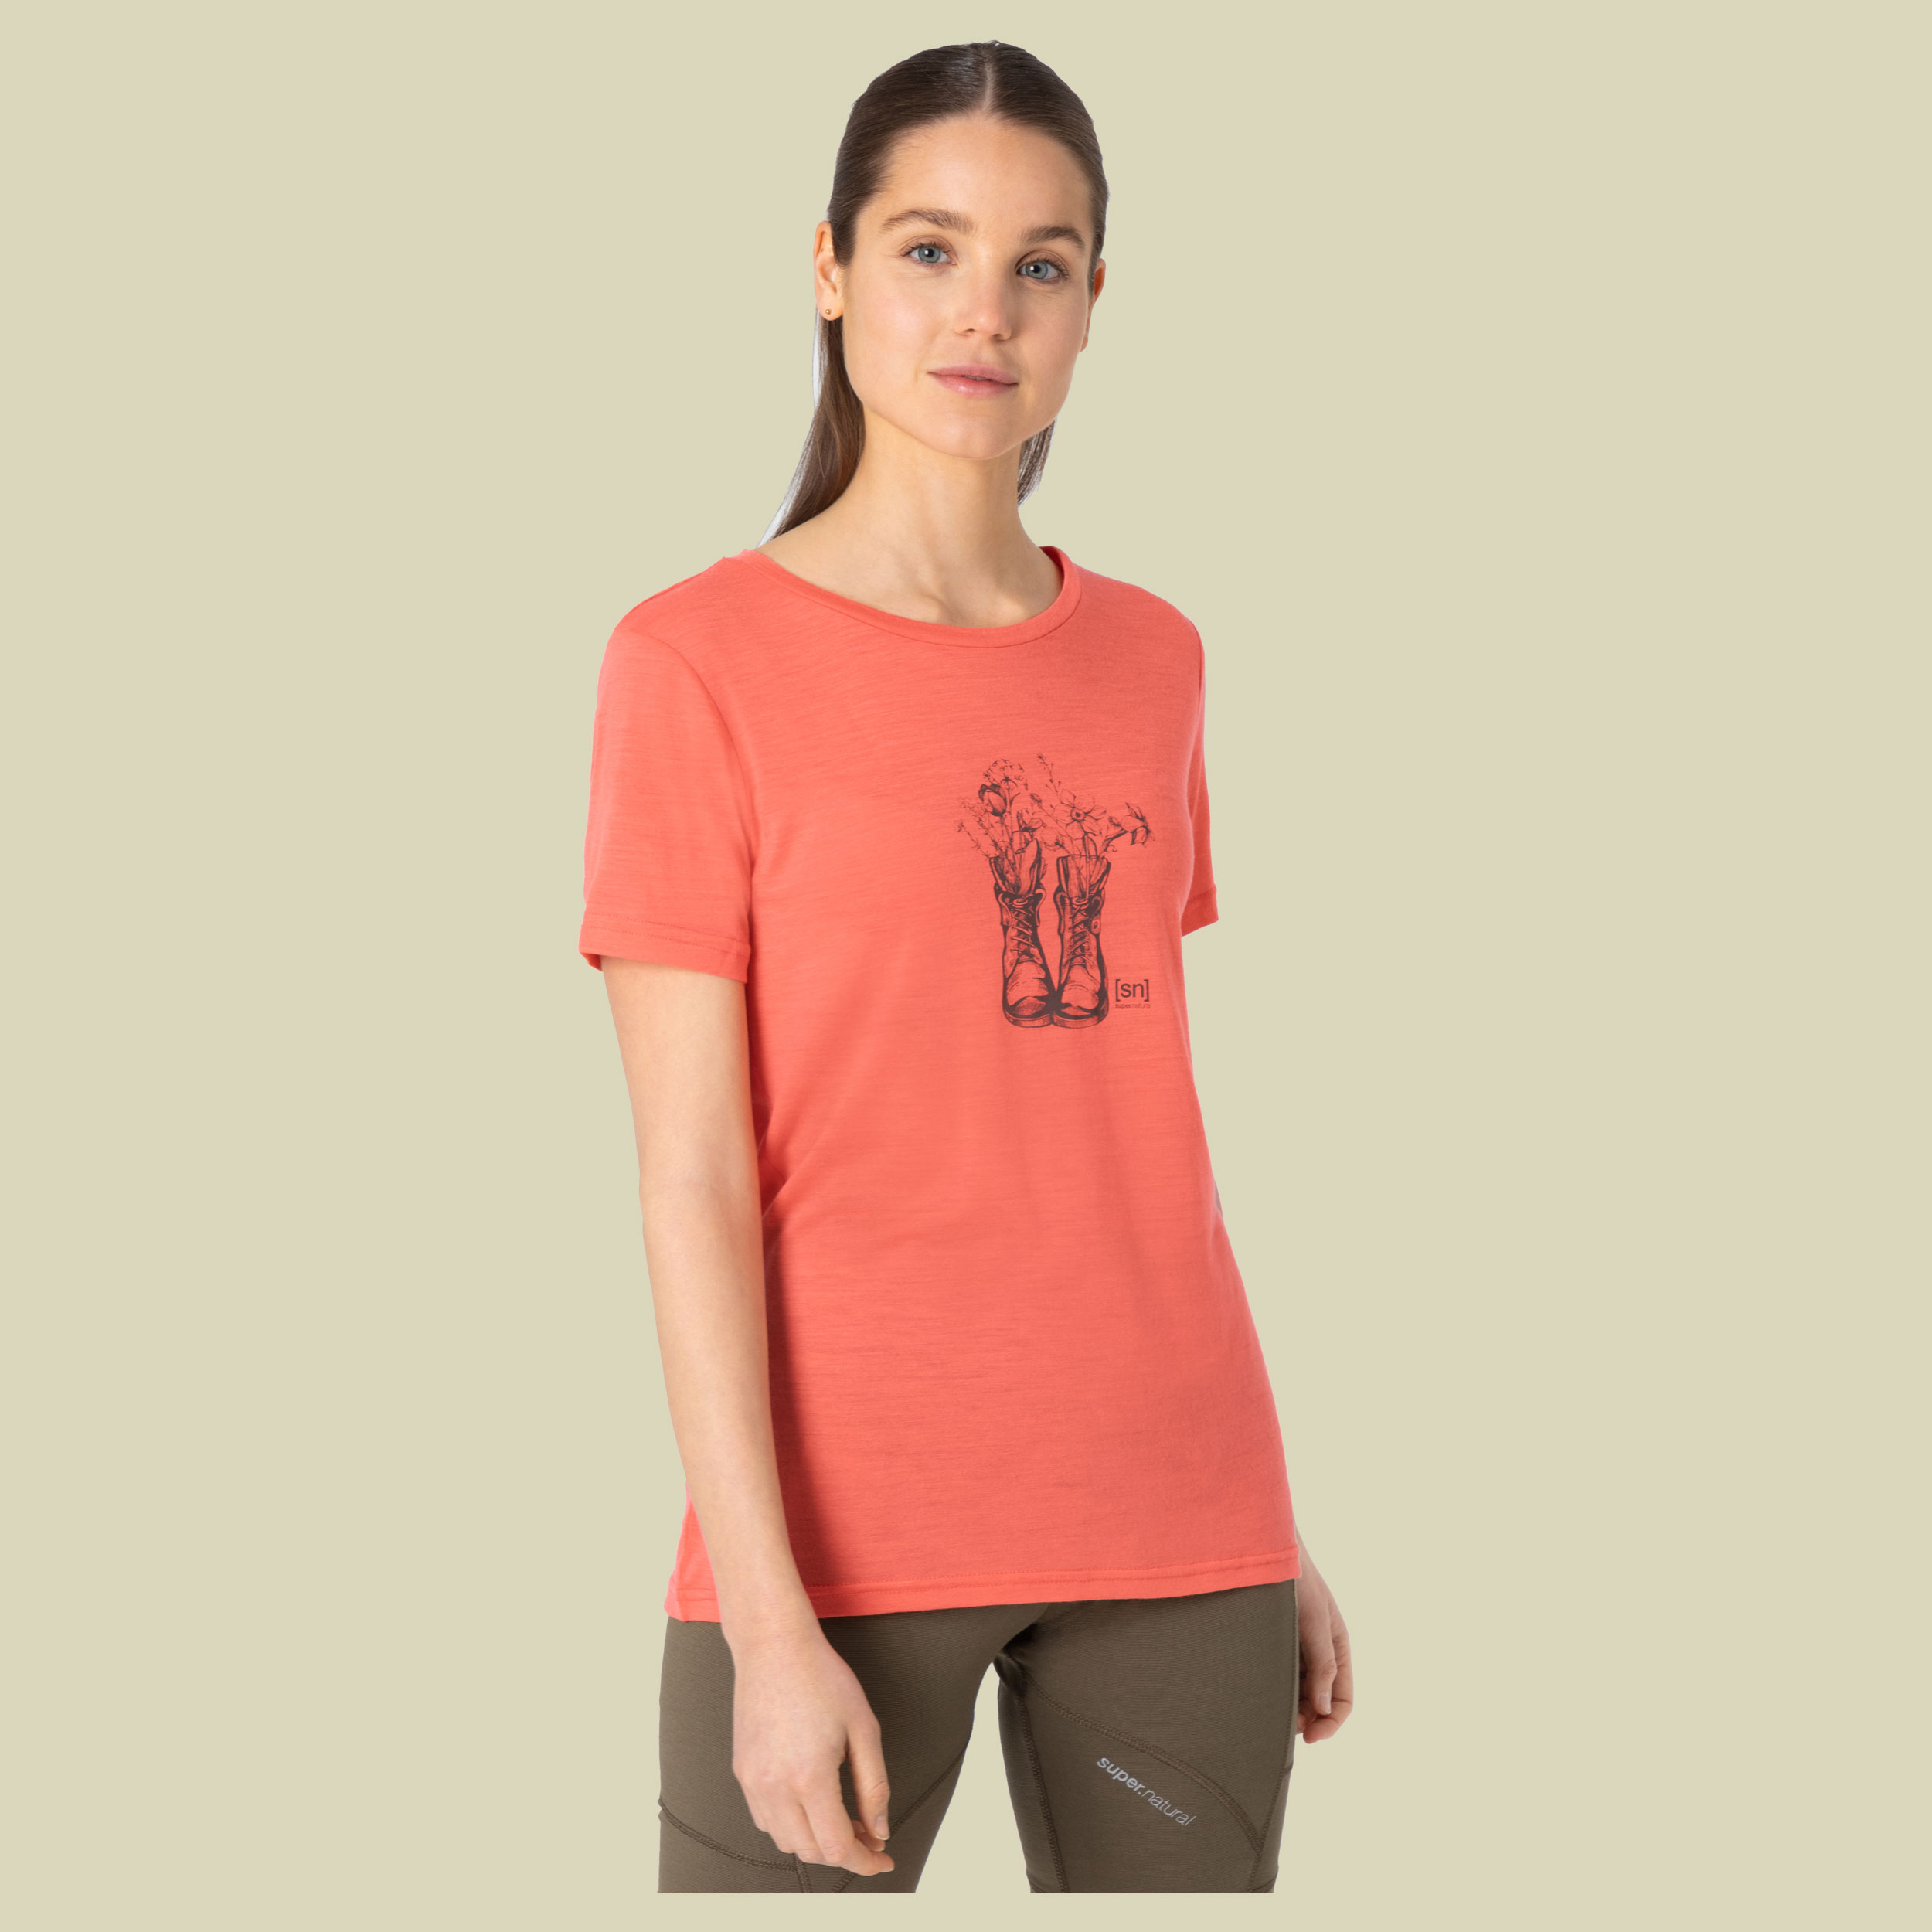 Blossom Boots Tee Women Größe L  Farbe living coral/stone grey